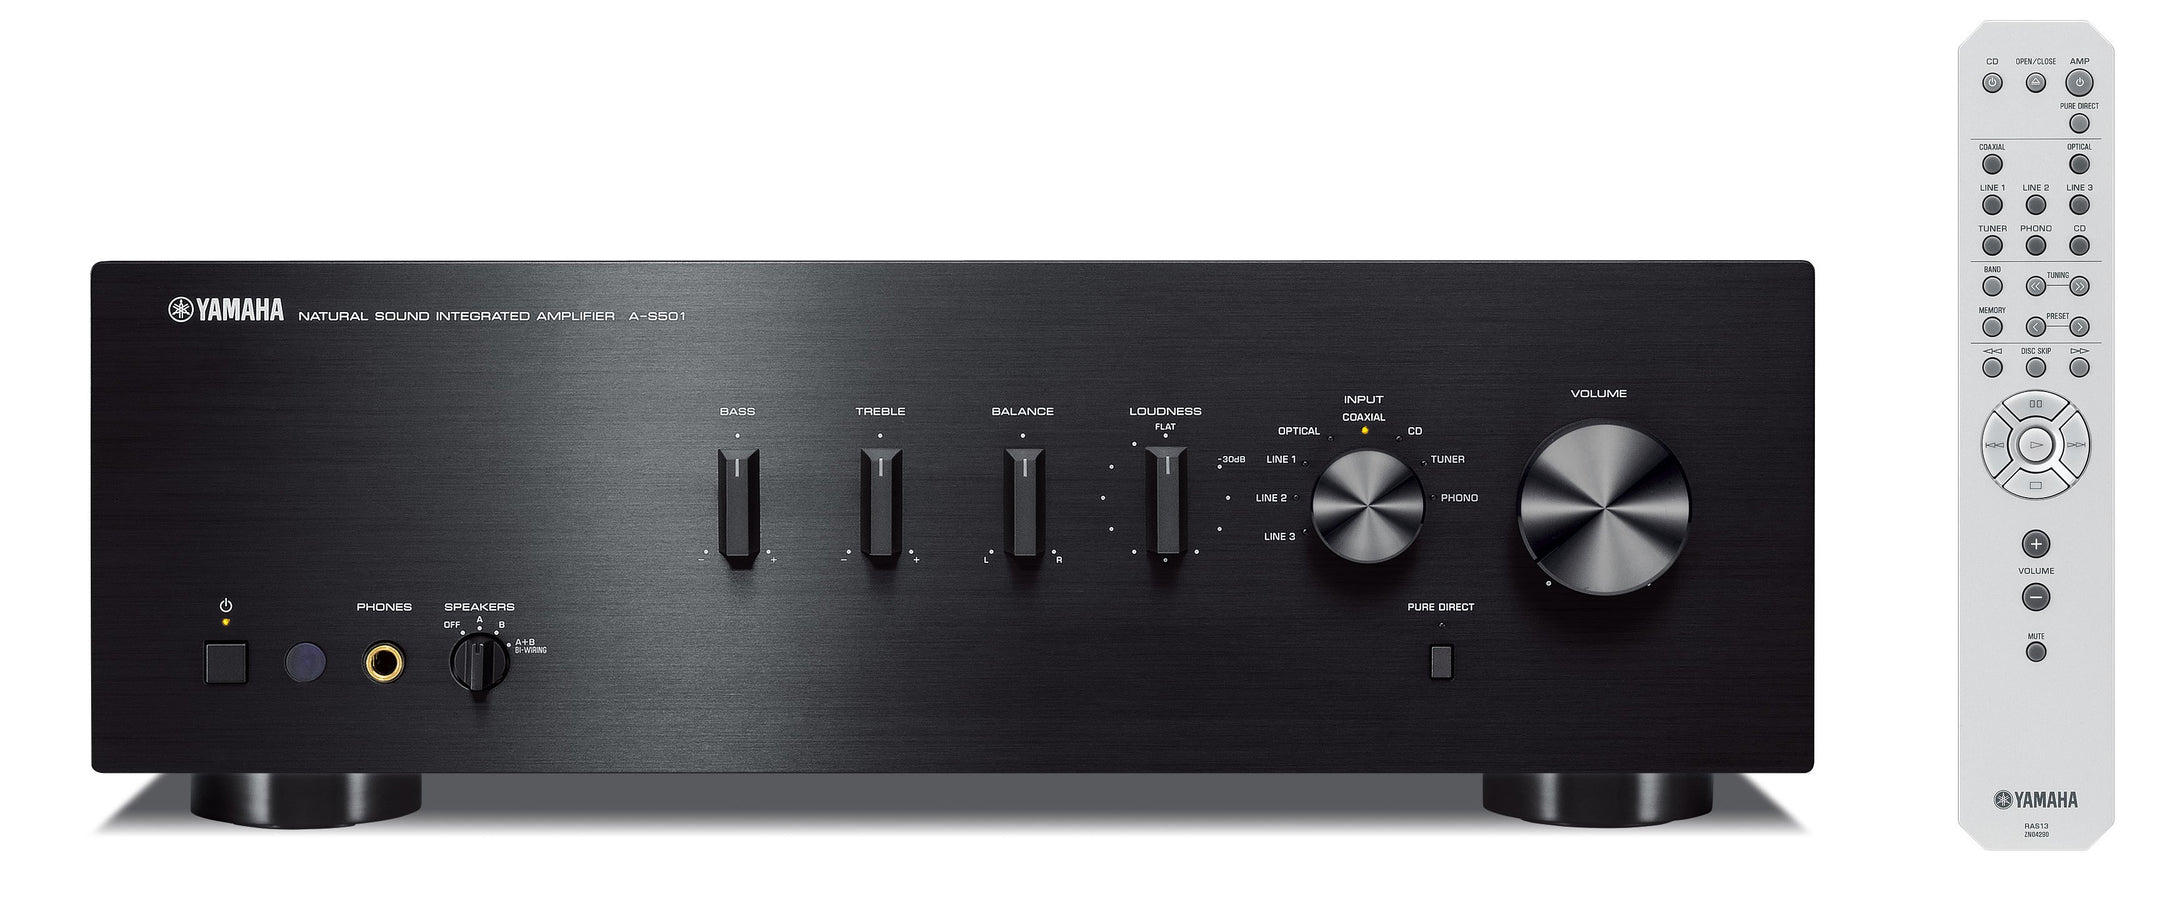 YAMAHA A-S501 STEREO INTERGRATED AMPLIFIER BLACK